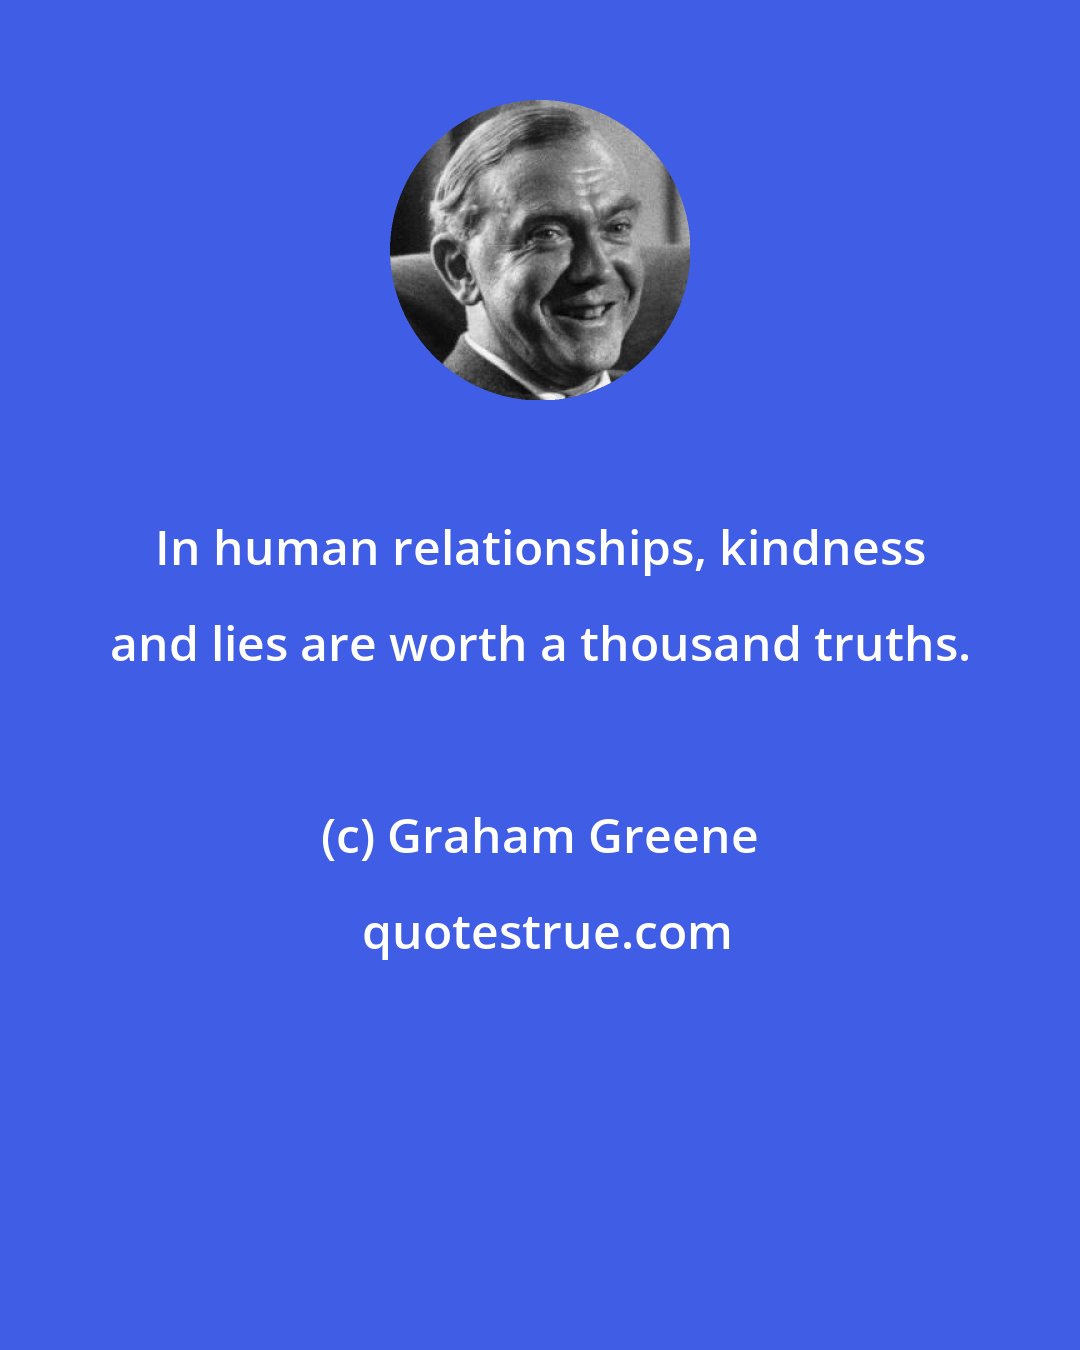 Graham Greene: In human relationships, kindness and lies are worth a thousand truths.